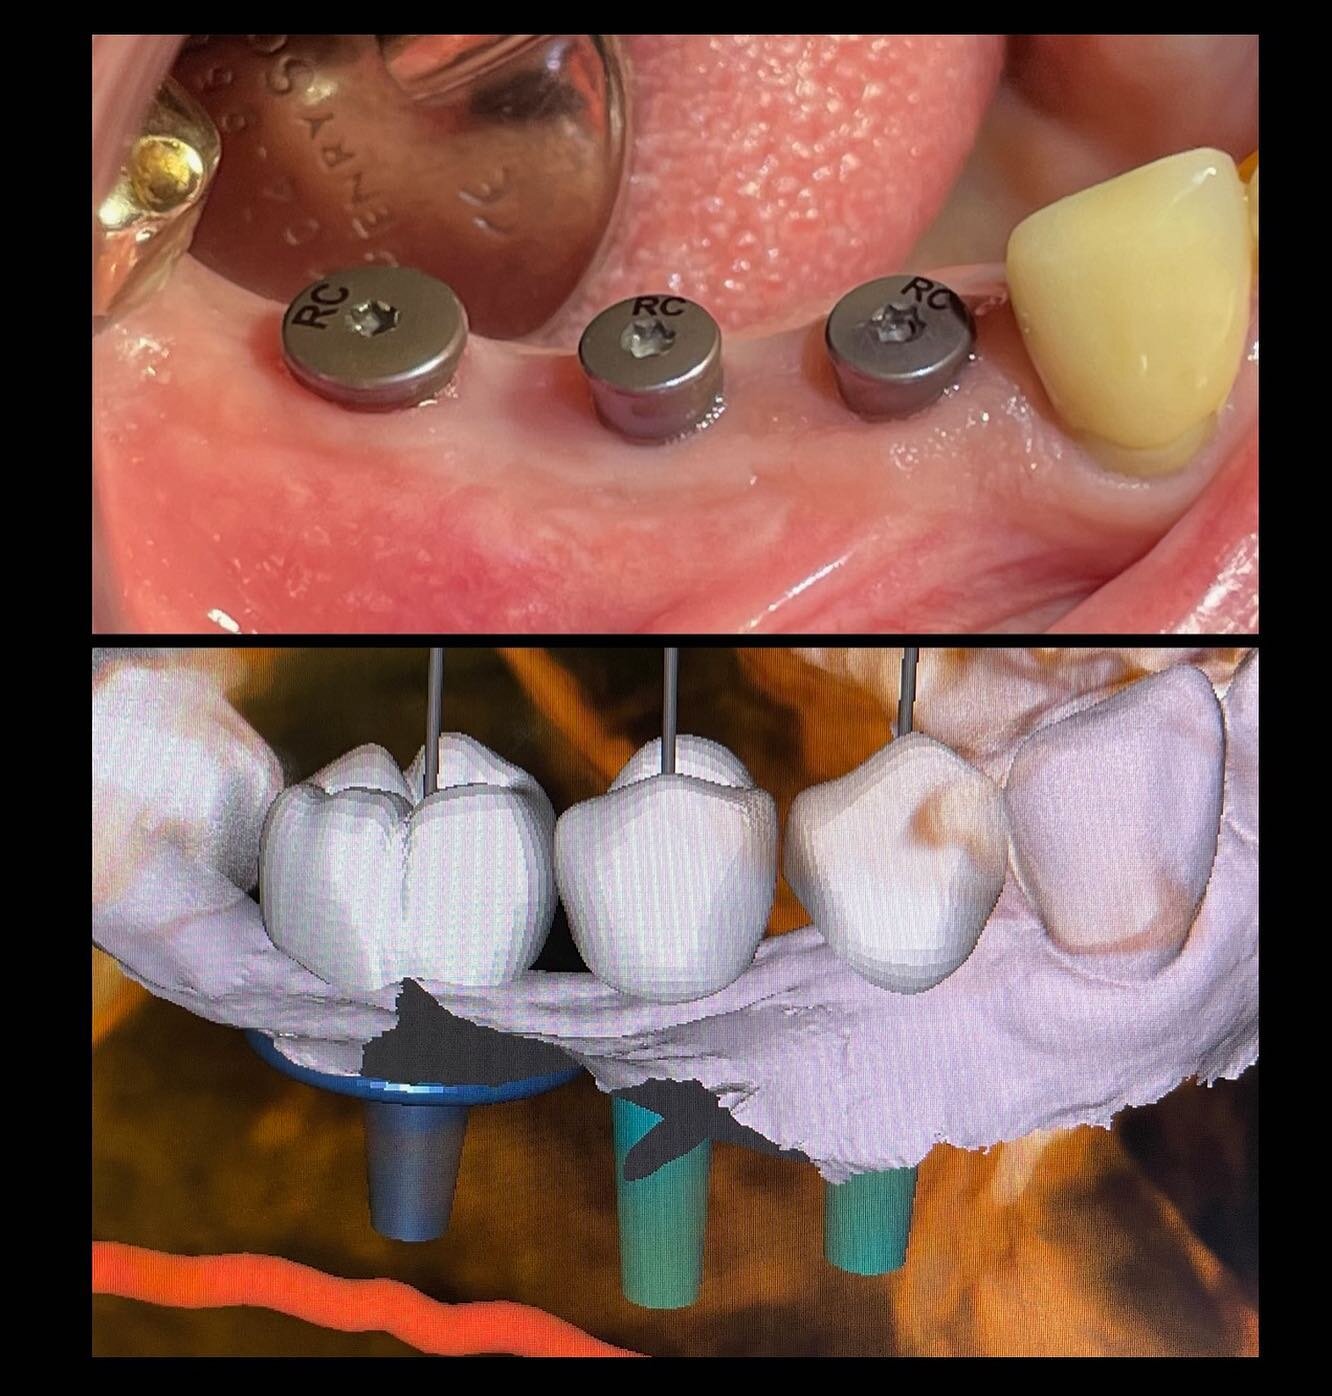 To know where you&rsquo;re going, it helps to have a plan.

Dental implant placement should be in a location based on the final plan.

The final plan includes the crowns (&lsquo;teeth&rsquo;) in a proper occlusion (&lsquo;bite&rsquo;) with implants u